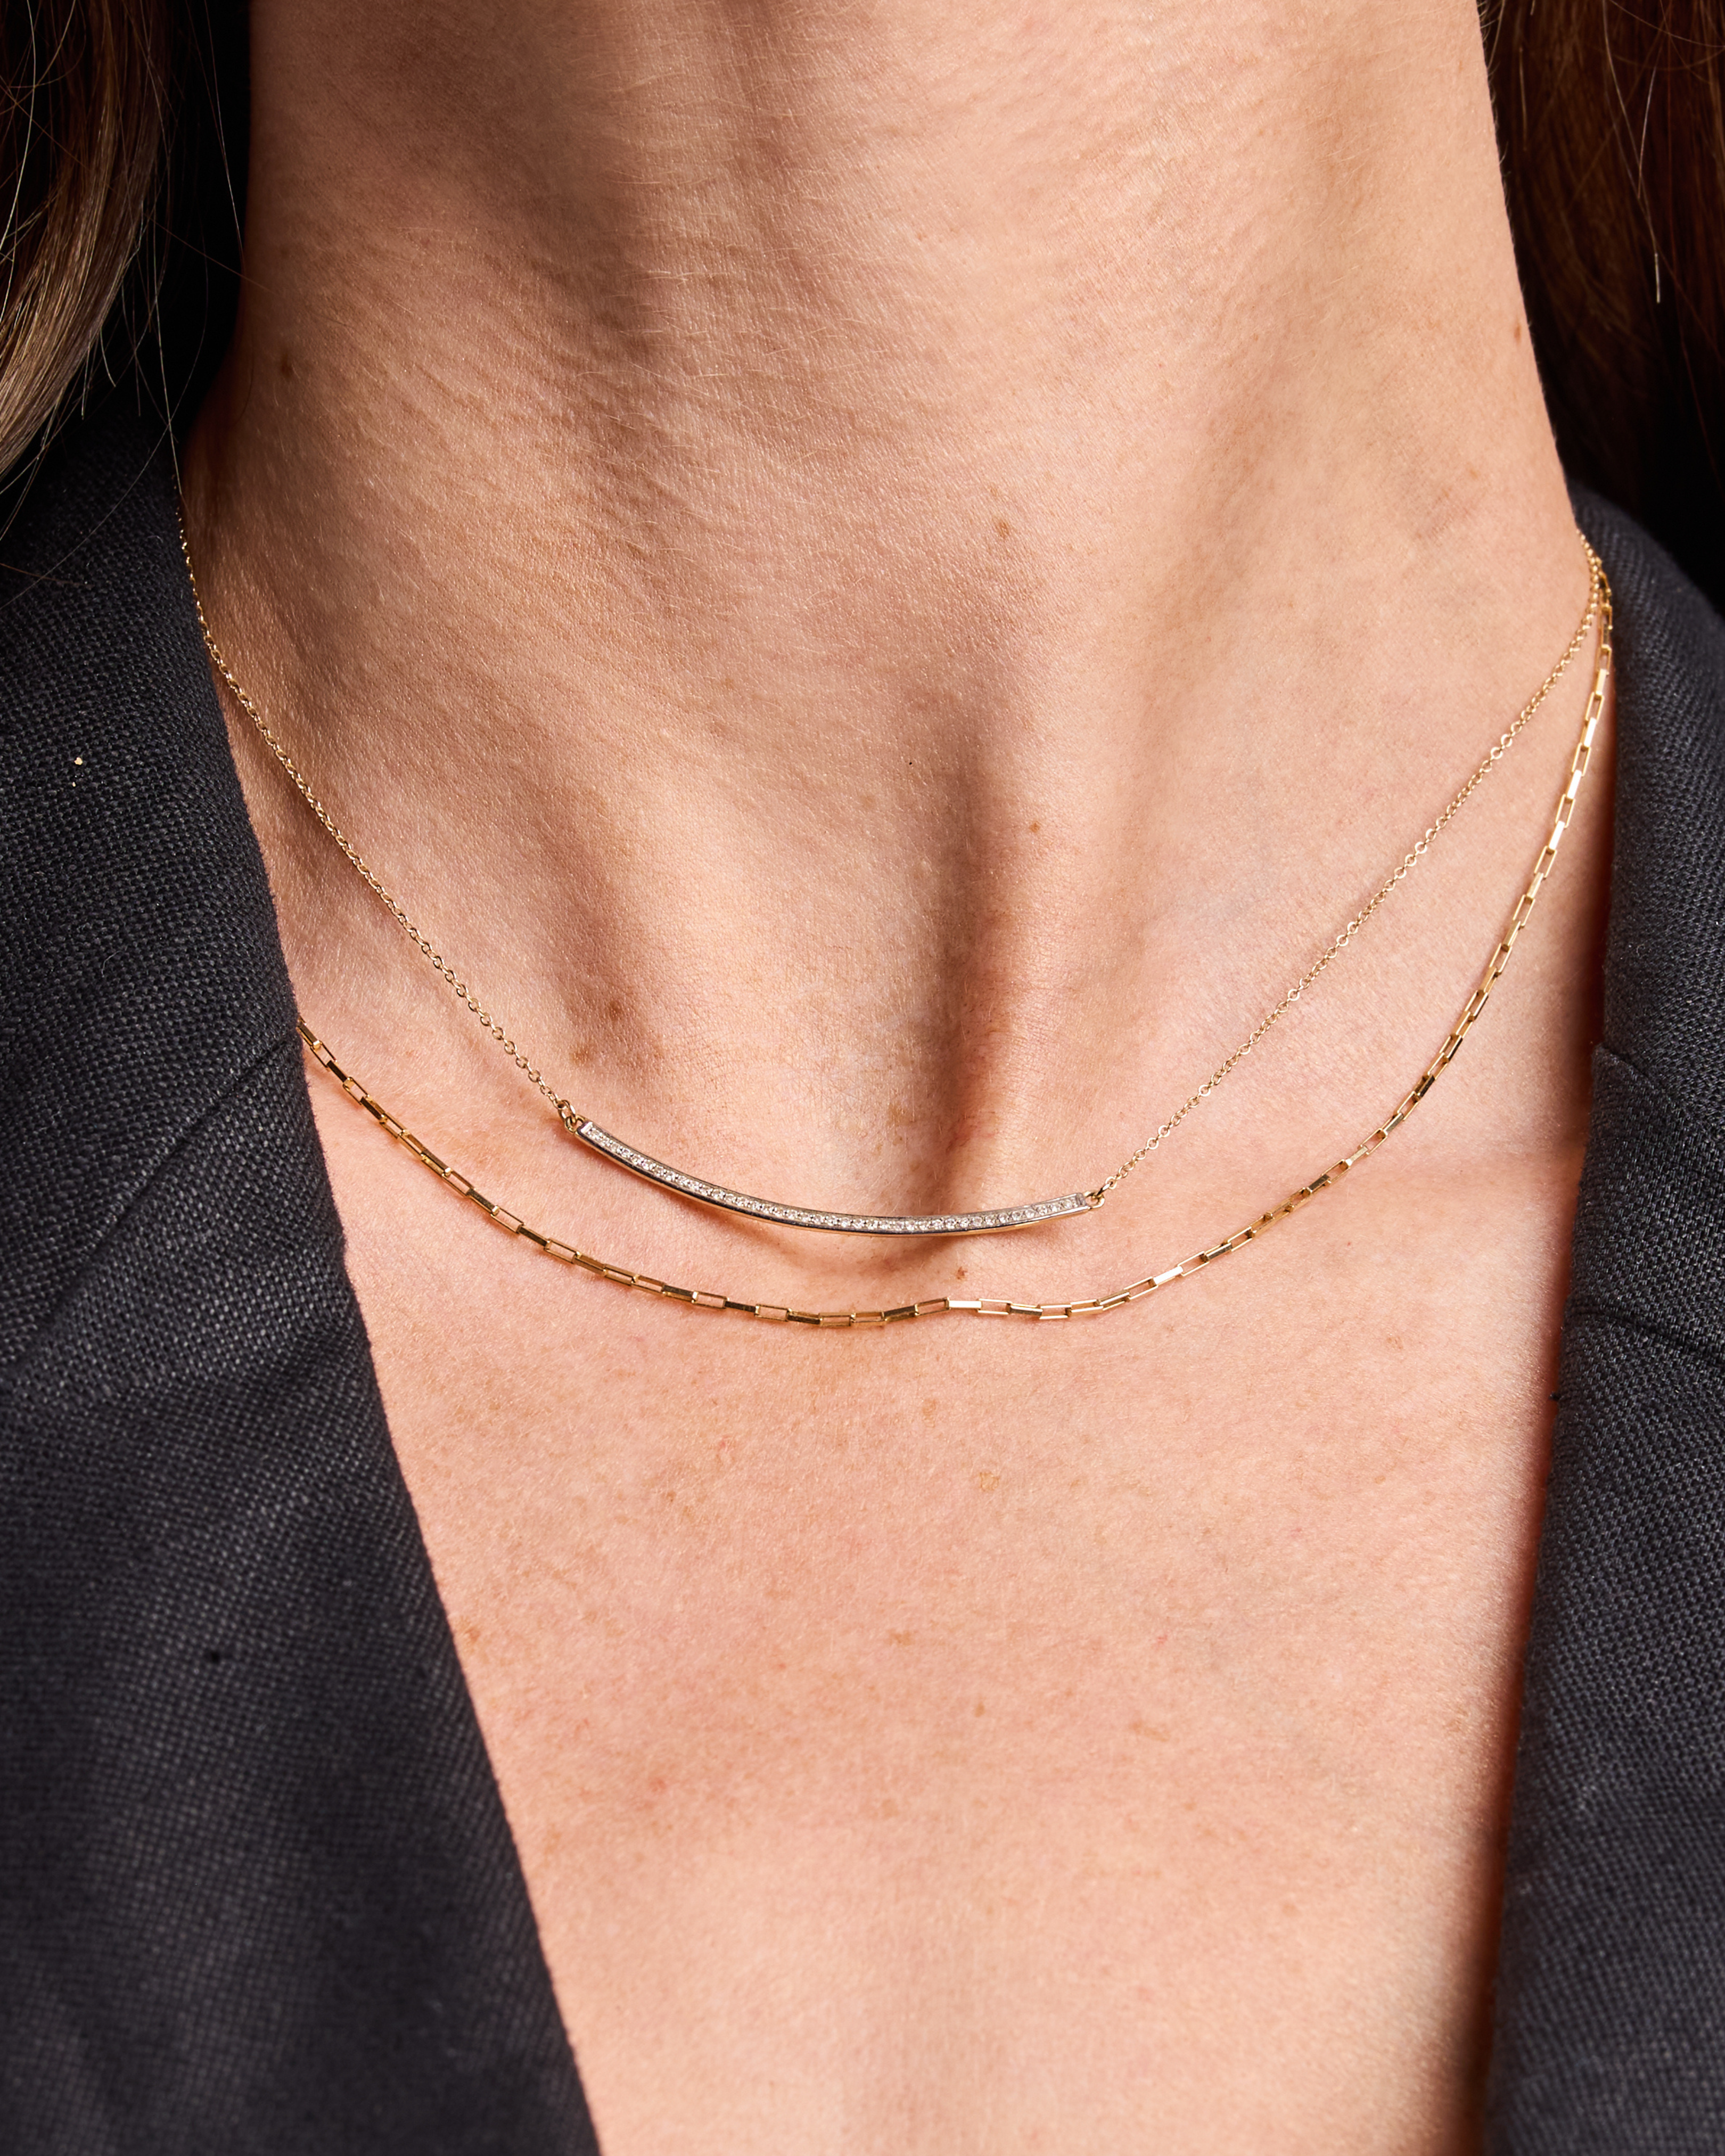 The Diamond Curved Bar Necklace